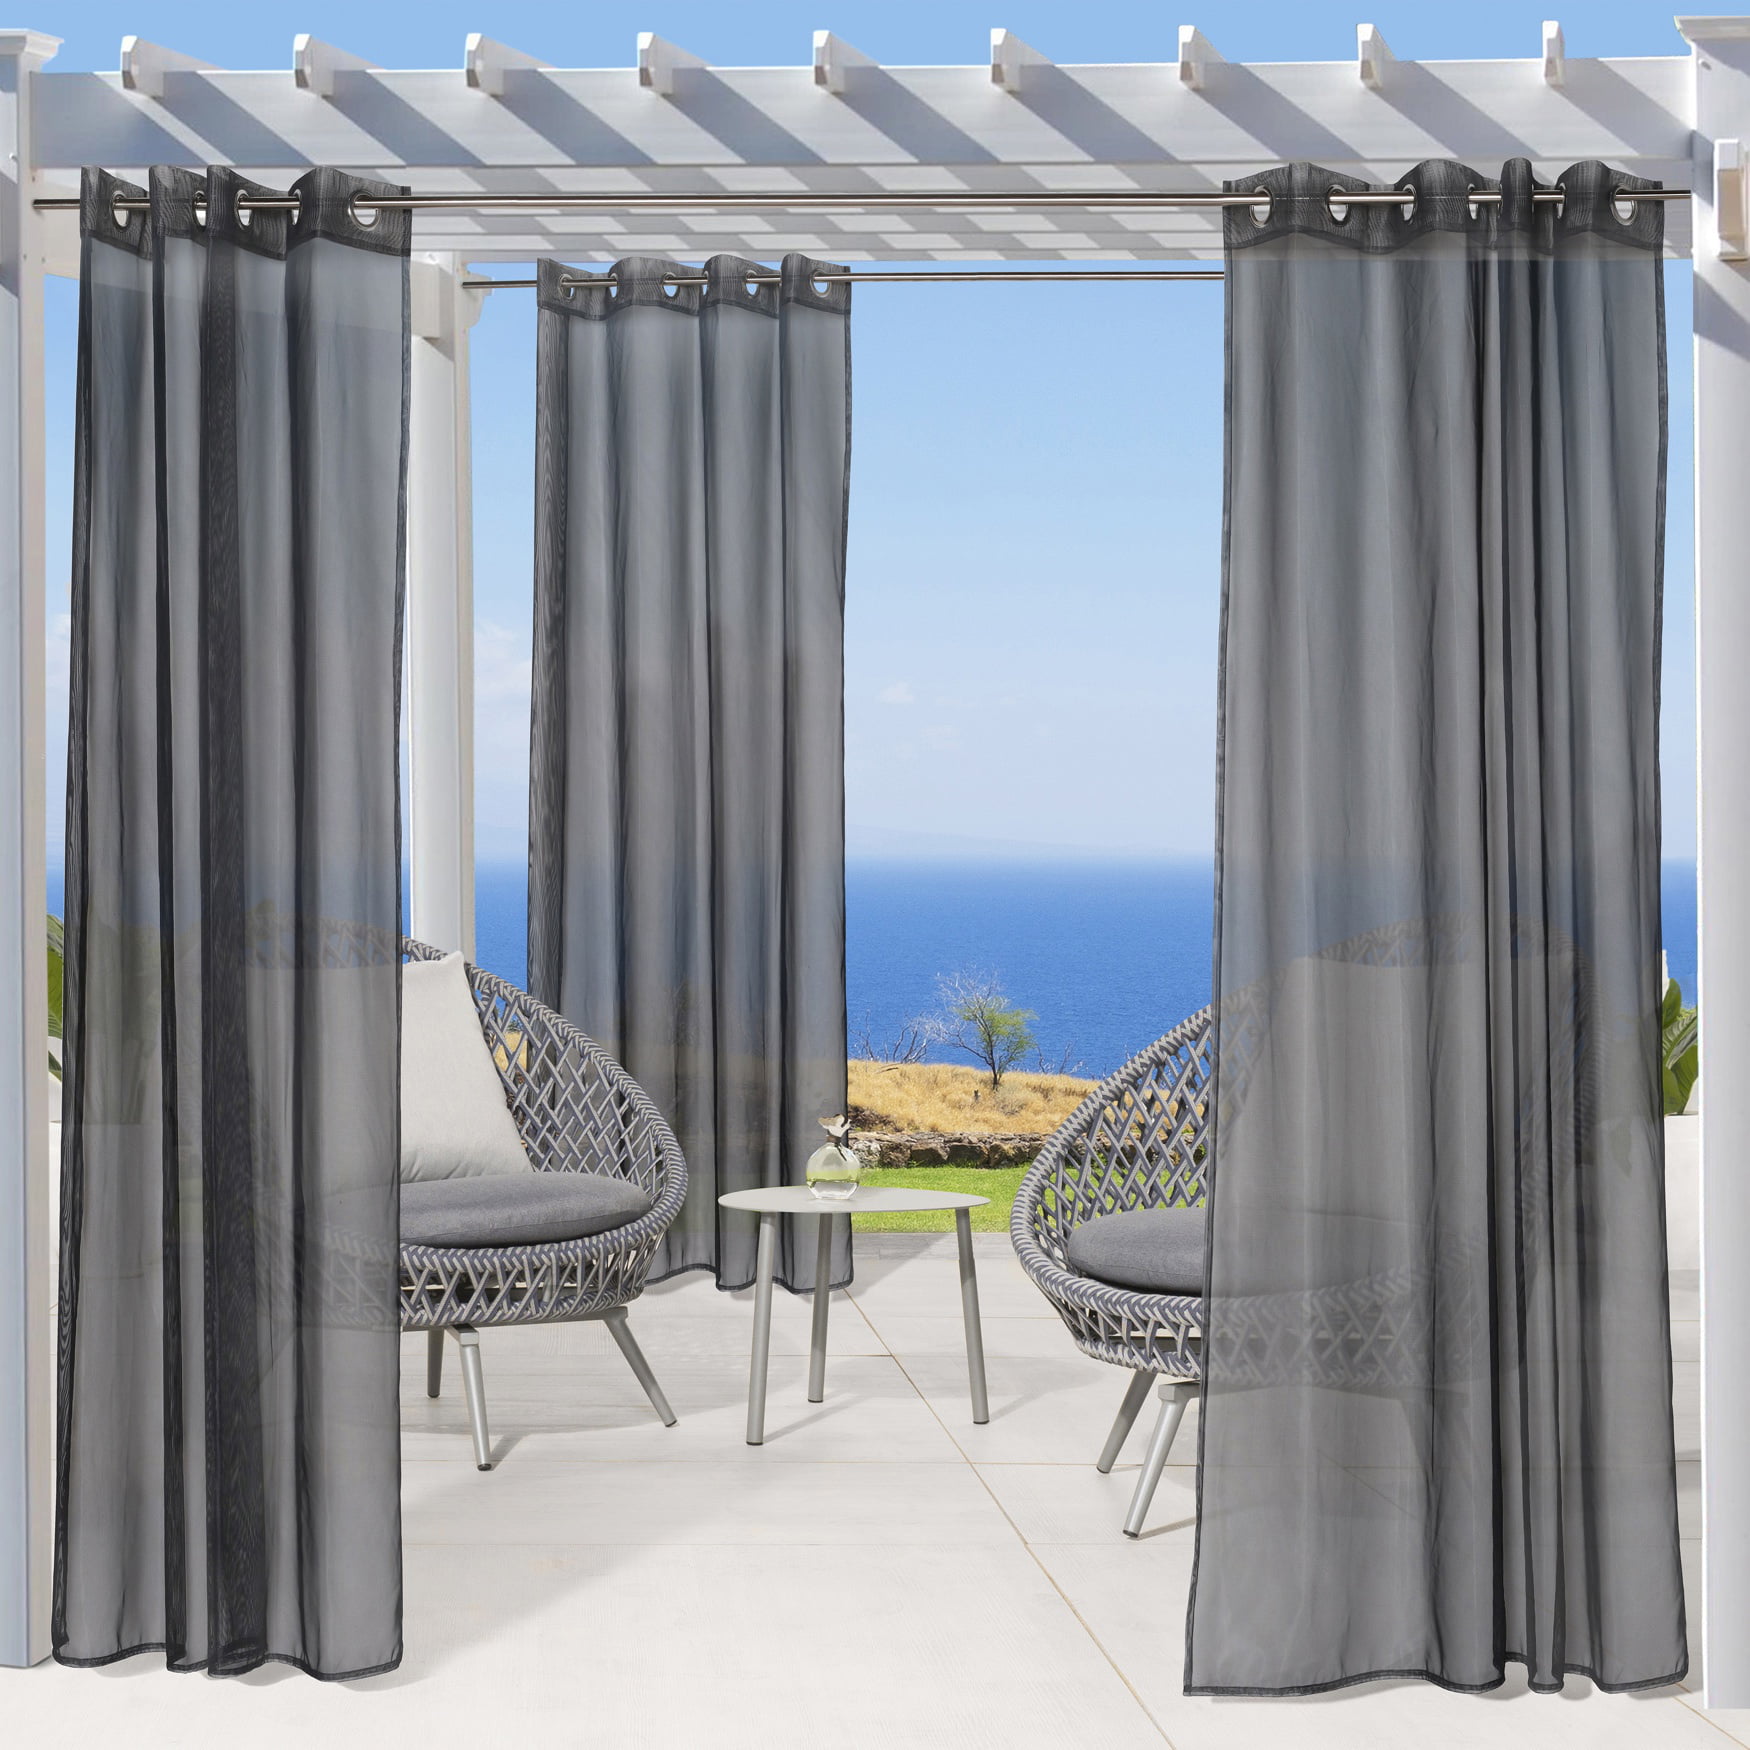 Blue Commonwealth Home Fashions 70503-109-601-96 Escape Sheer Stripe Grommet Outdoor Top Curtain Panel 96 in. 